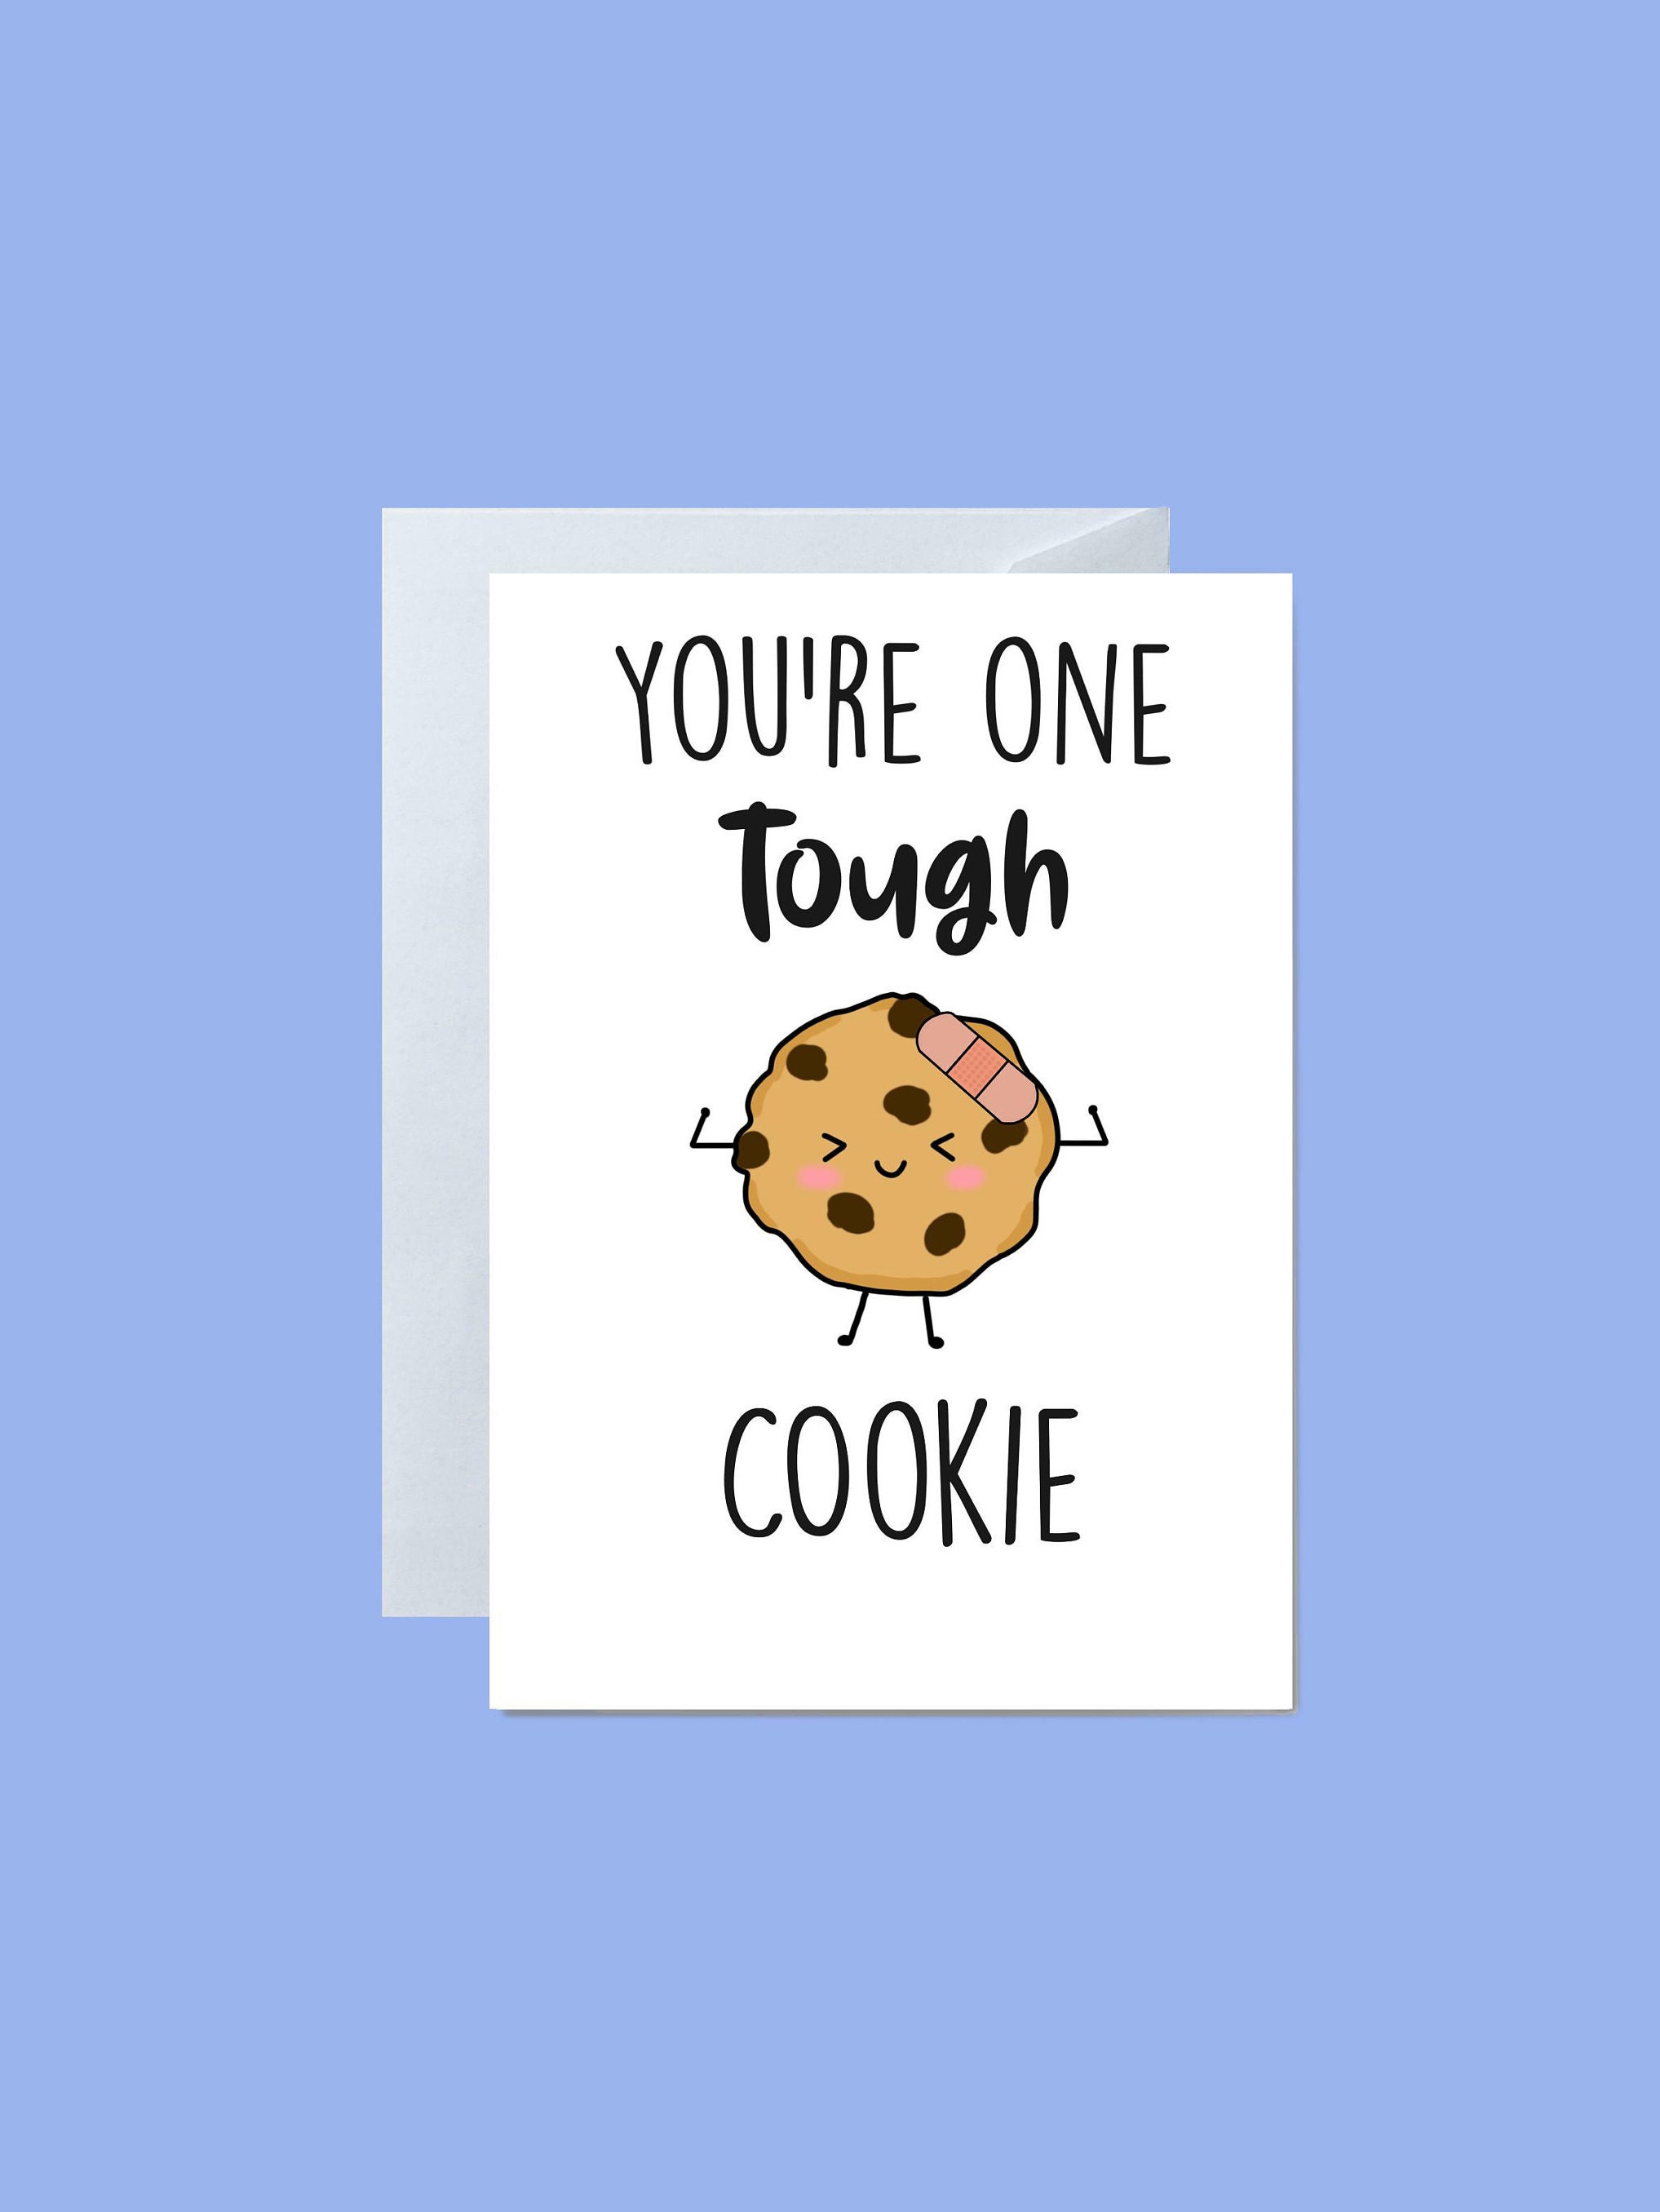 9. 'You're One Tough Cookie' Card